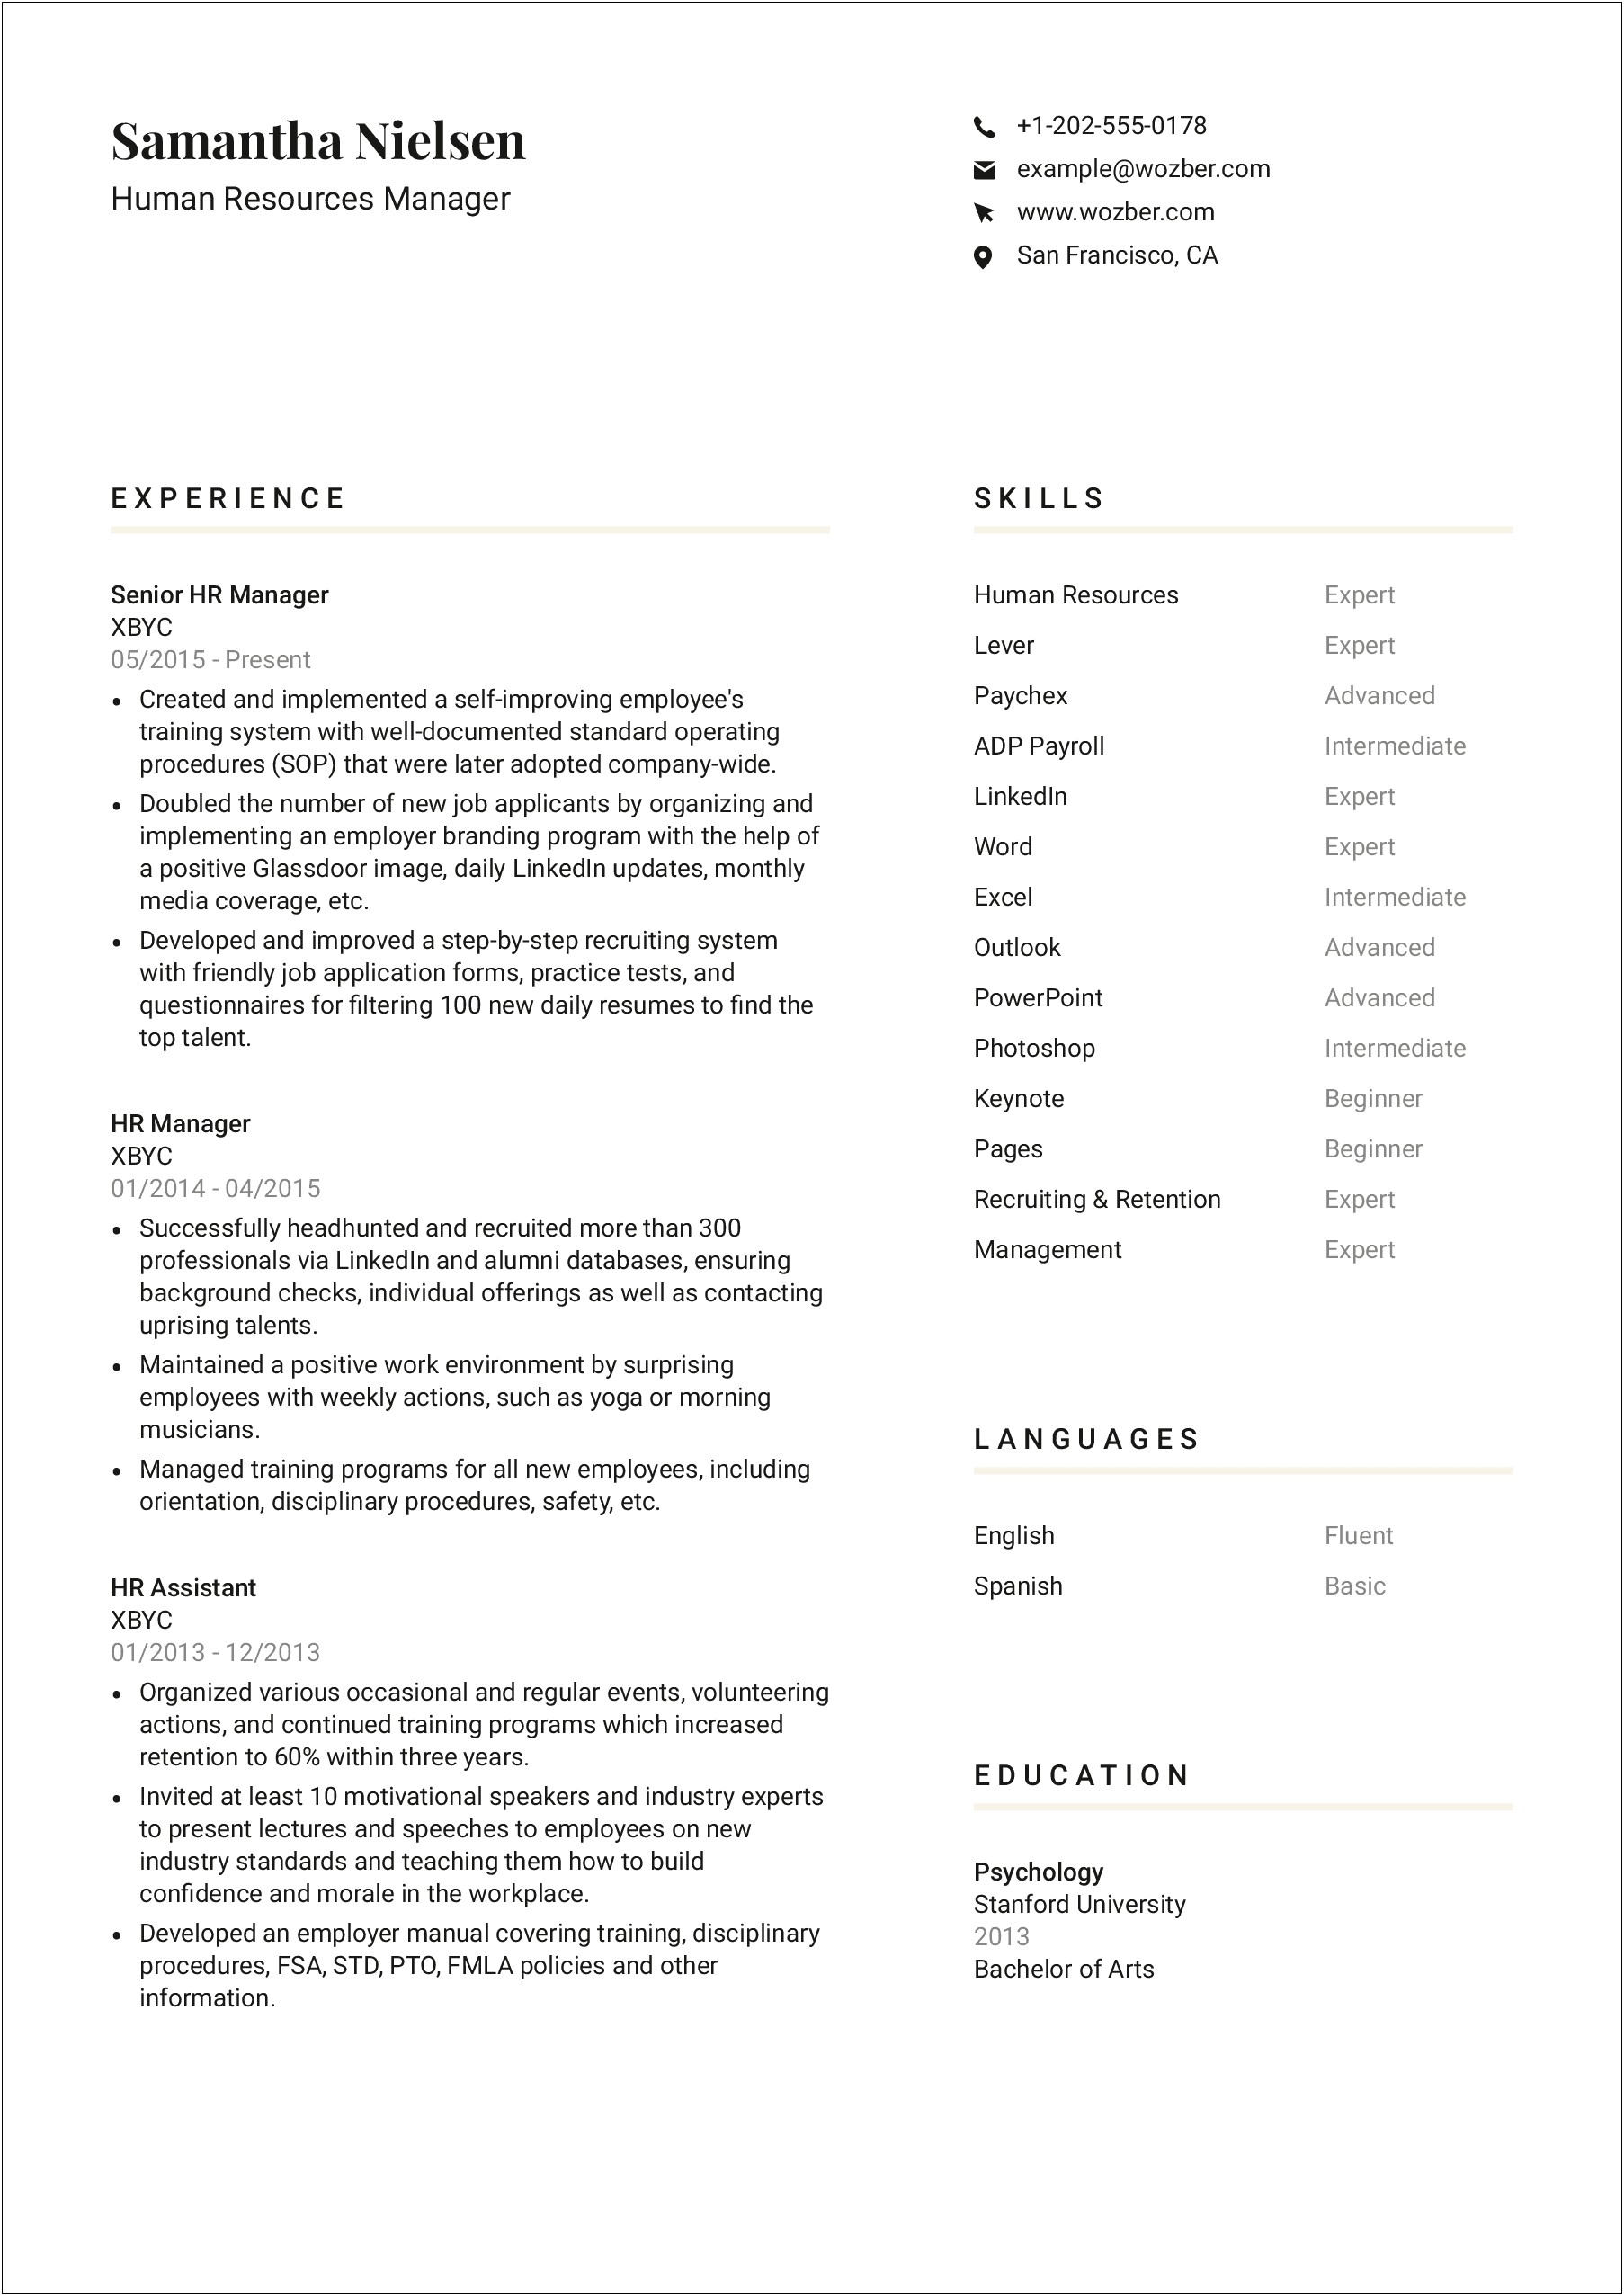 Human Resources Work From Home Resume Templates